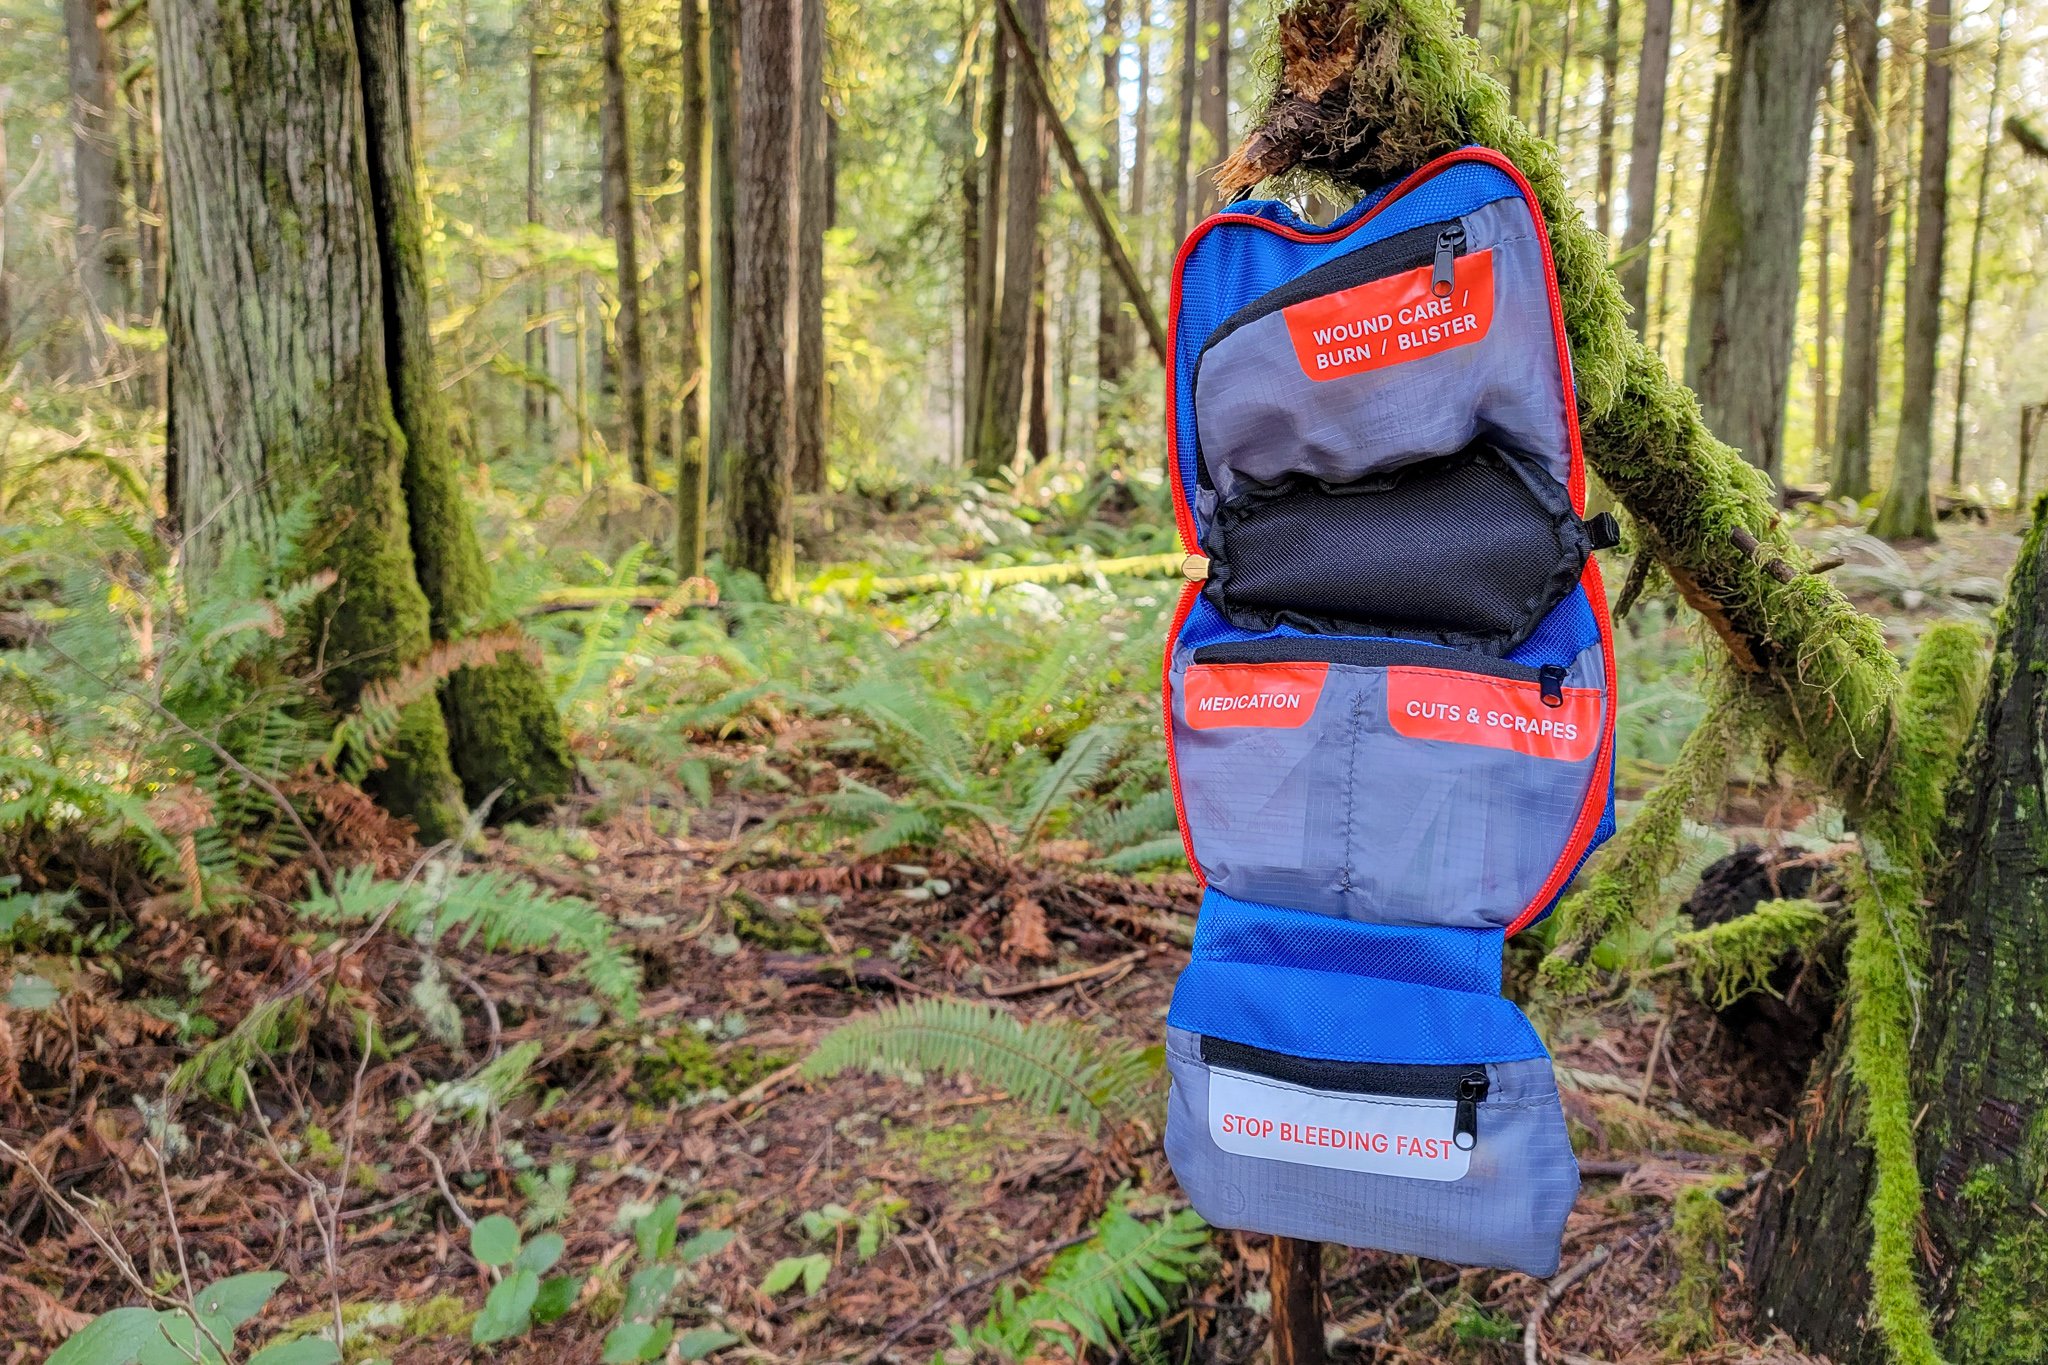 The Adventure Medical Kits Hiker First Aid Kit hanging from a branch in a fern-filled forest